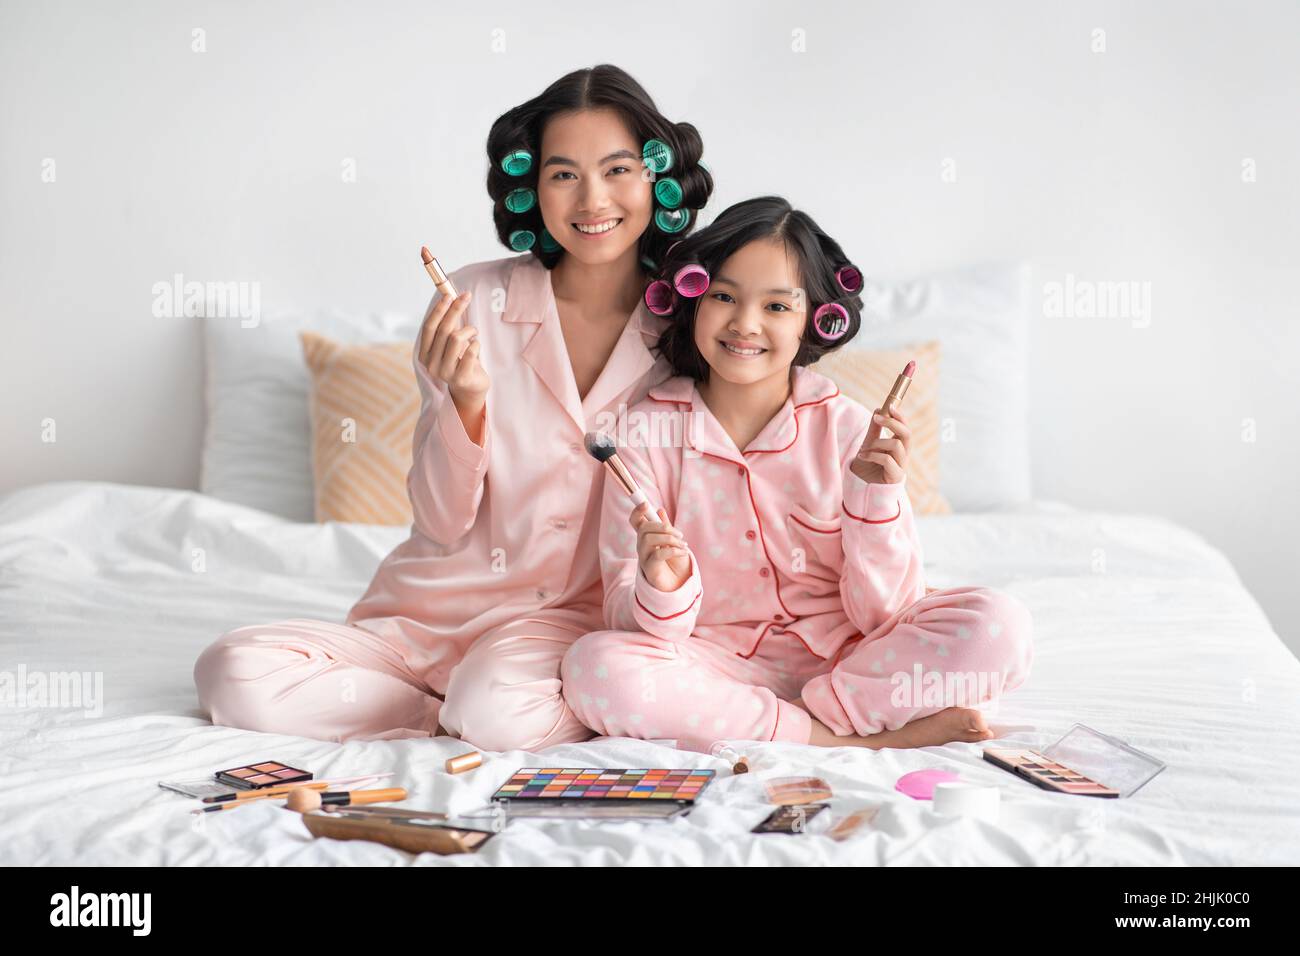 Happy millennial japanese female and adolescent girl with curlers hold brushes sit on bed with cosmetics Stock Photo